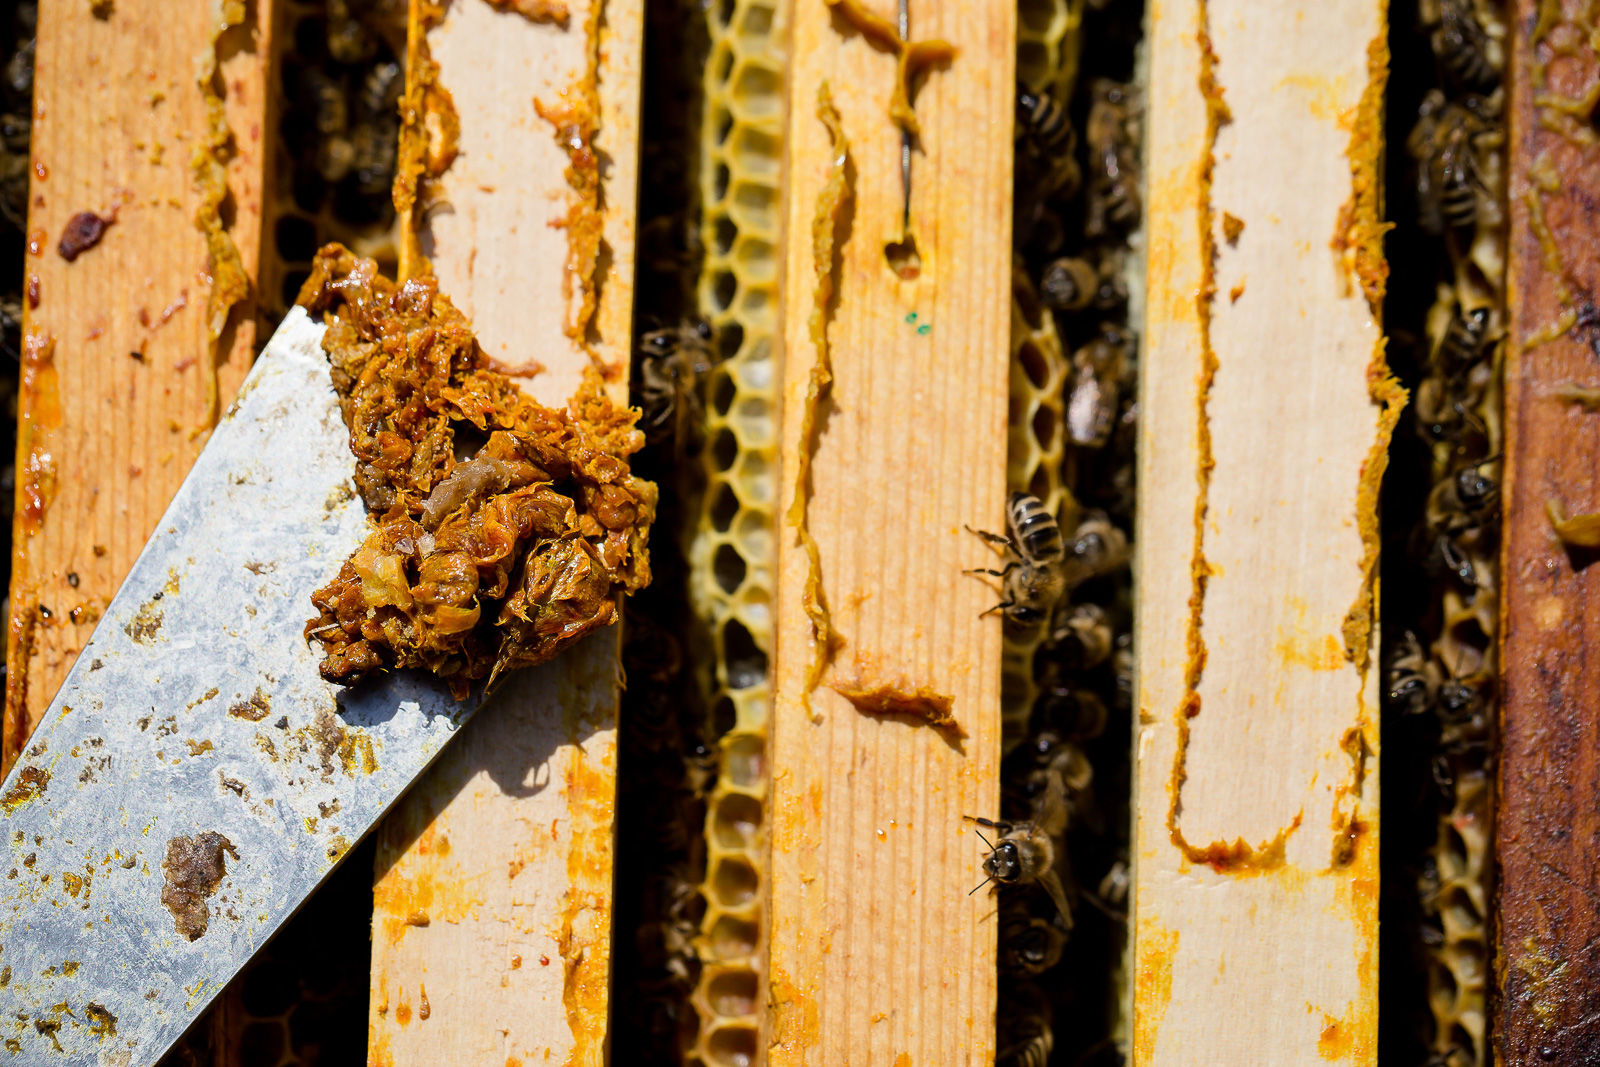 scraper with propolis on it by a bee hive